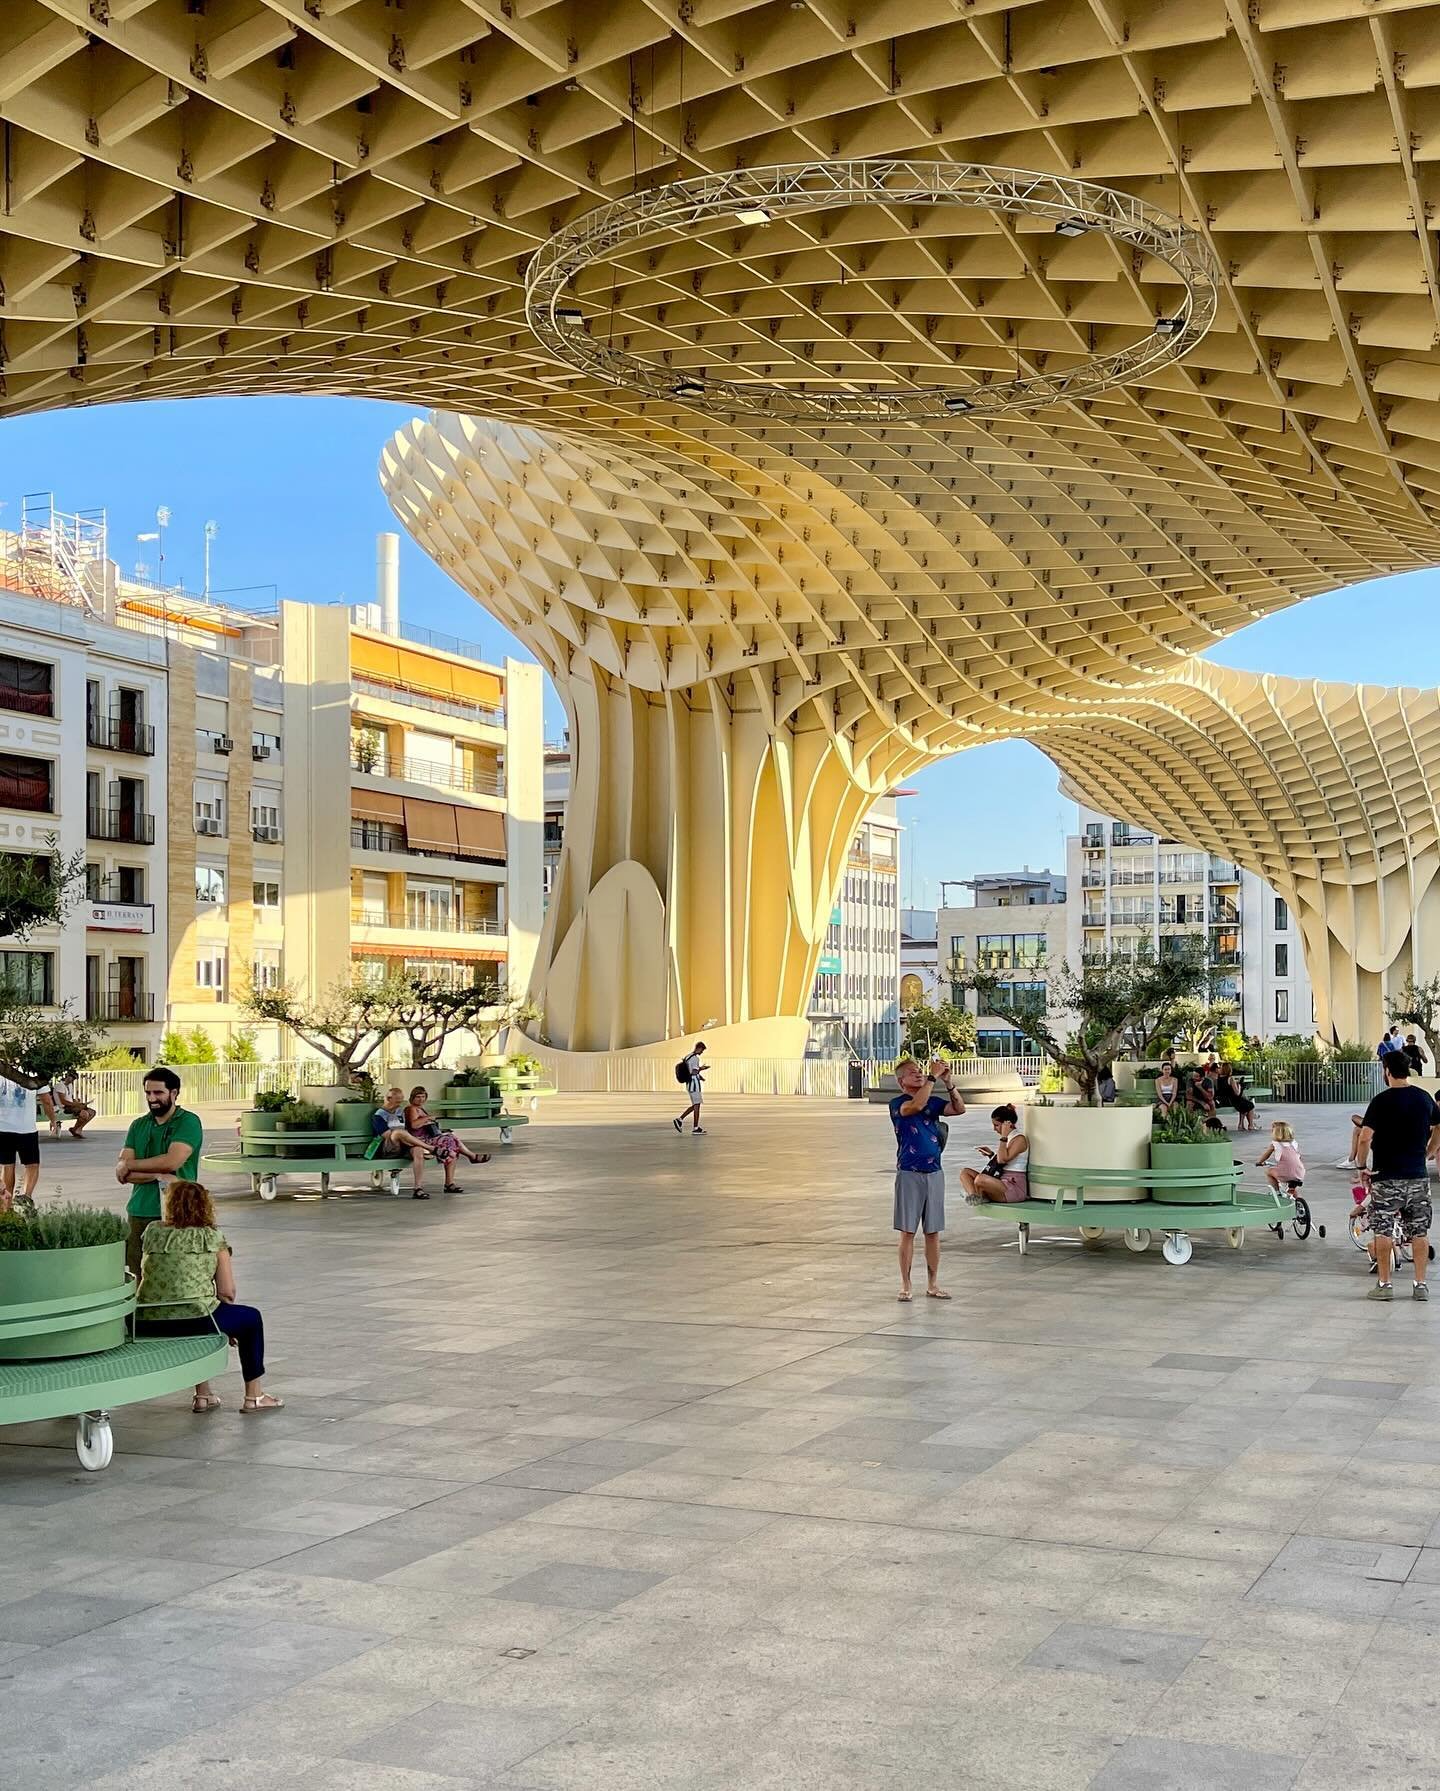 Magic Mushrooms. The unconventional and modern marvel of Metropol Parasol, known as Las Setas (The Mushrooms) by locals, took root in Seville&rsquo;s Plaza de la Encarnaci&oacute;n in 2011. Designed by German architect J&uuml;rgen Mayer, the structur